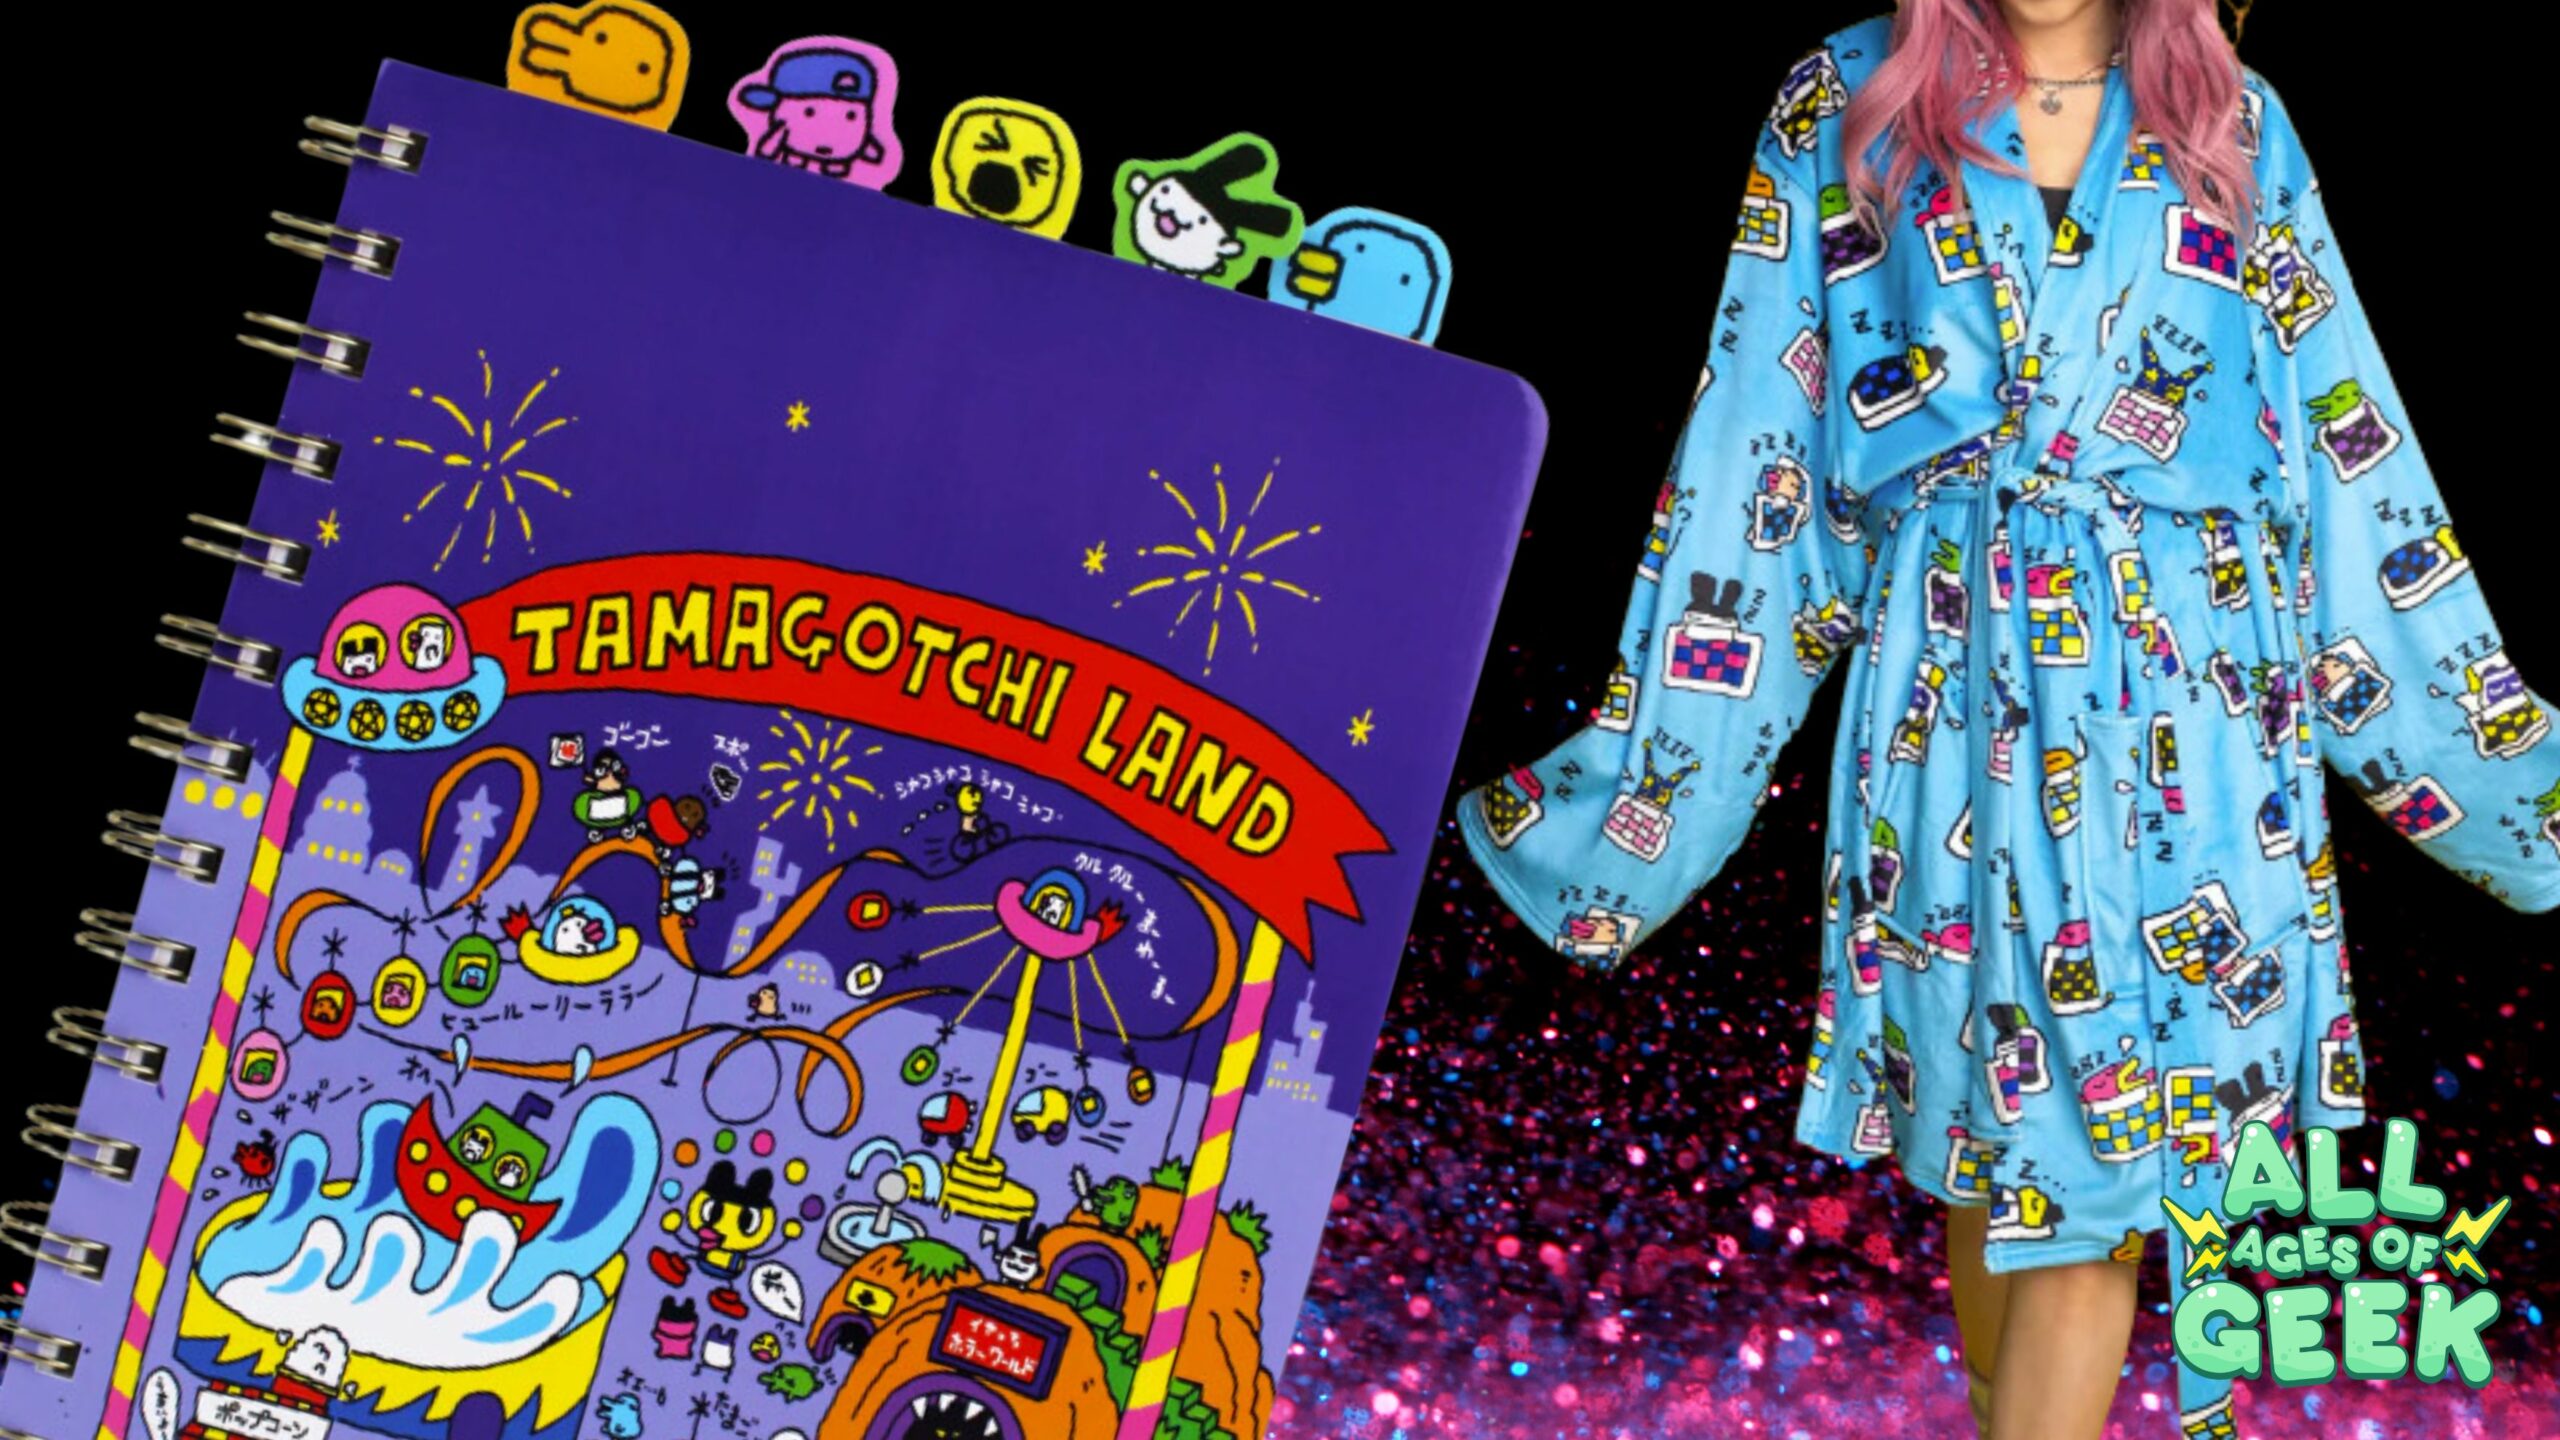 The image showcases a vibrant Tamagotchi-themed spiral notebook and a robe. The notebook, titled "Tamagotchi Land," features colorful amusement park illustrations with Tamagotchi characters and fireworks. The robe, worn by a person with pink hair, is light blue with various Tamagotchi characters and devices printed on it. The "All Ages of Geek" logo is displayed in the bottom right corner.